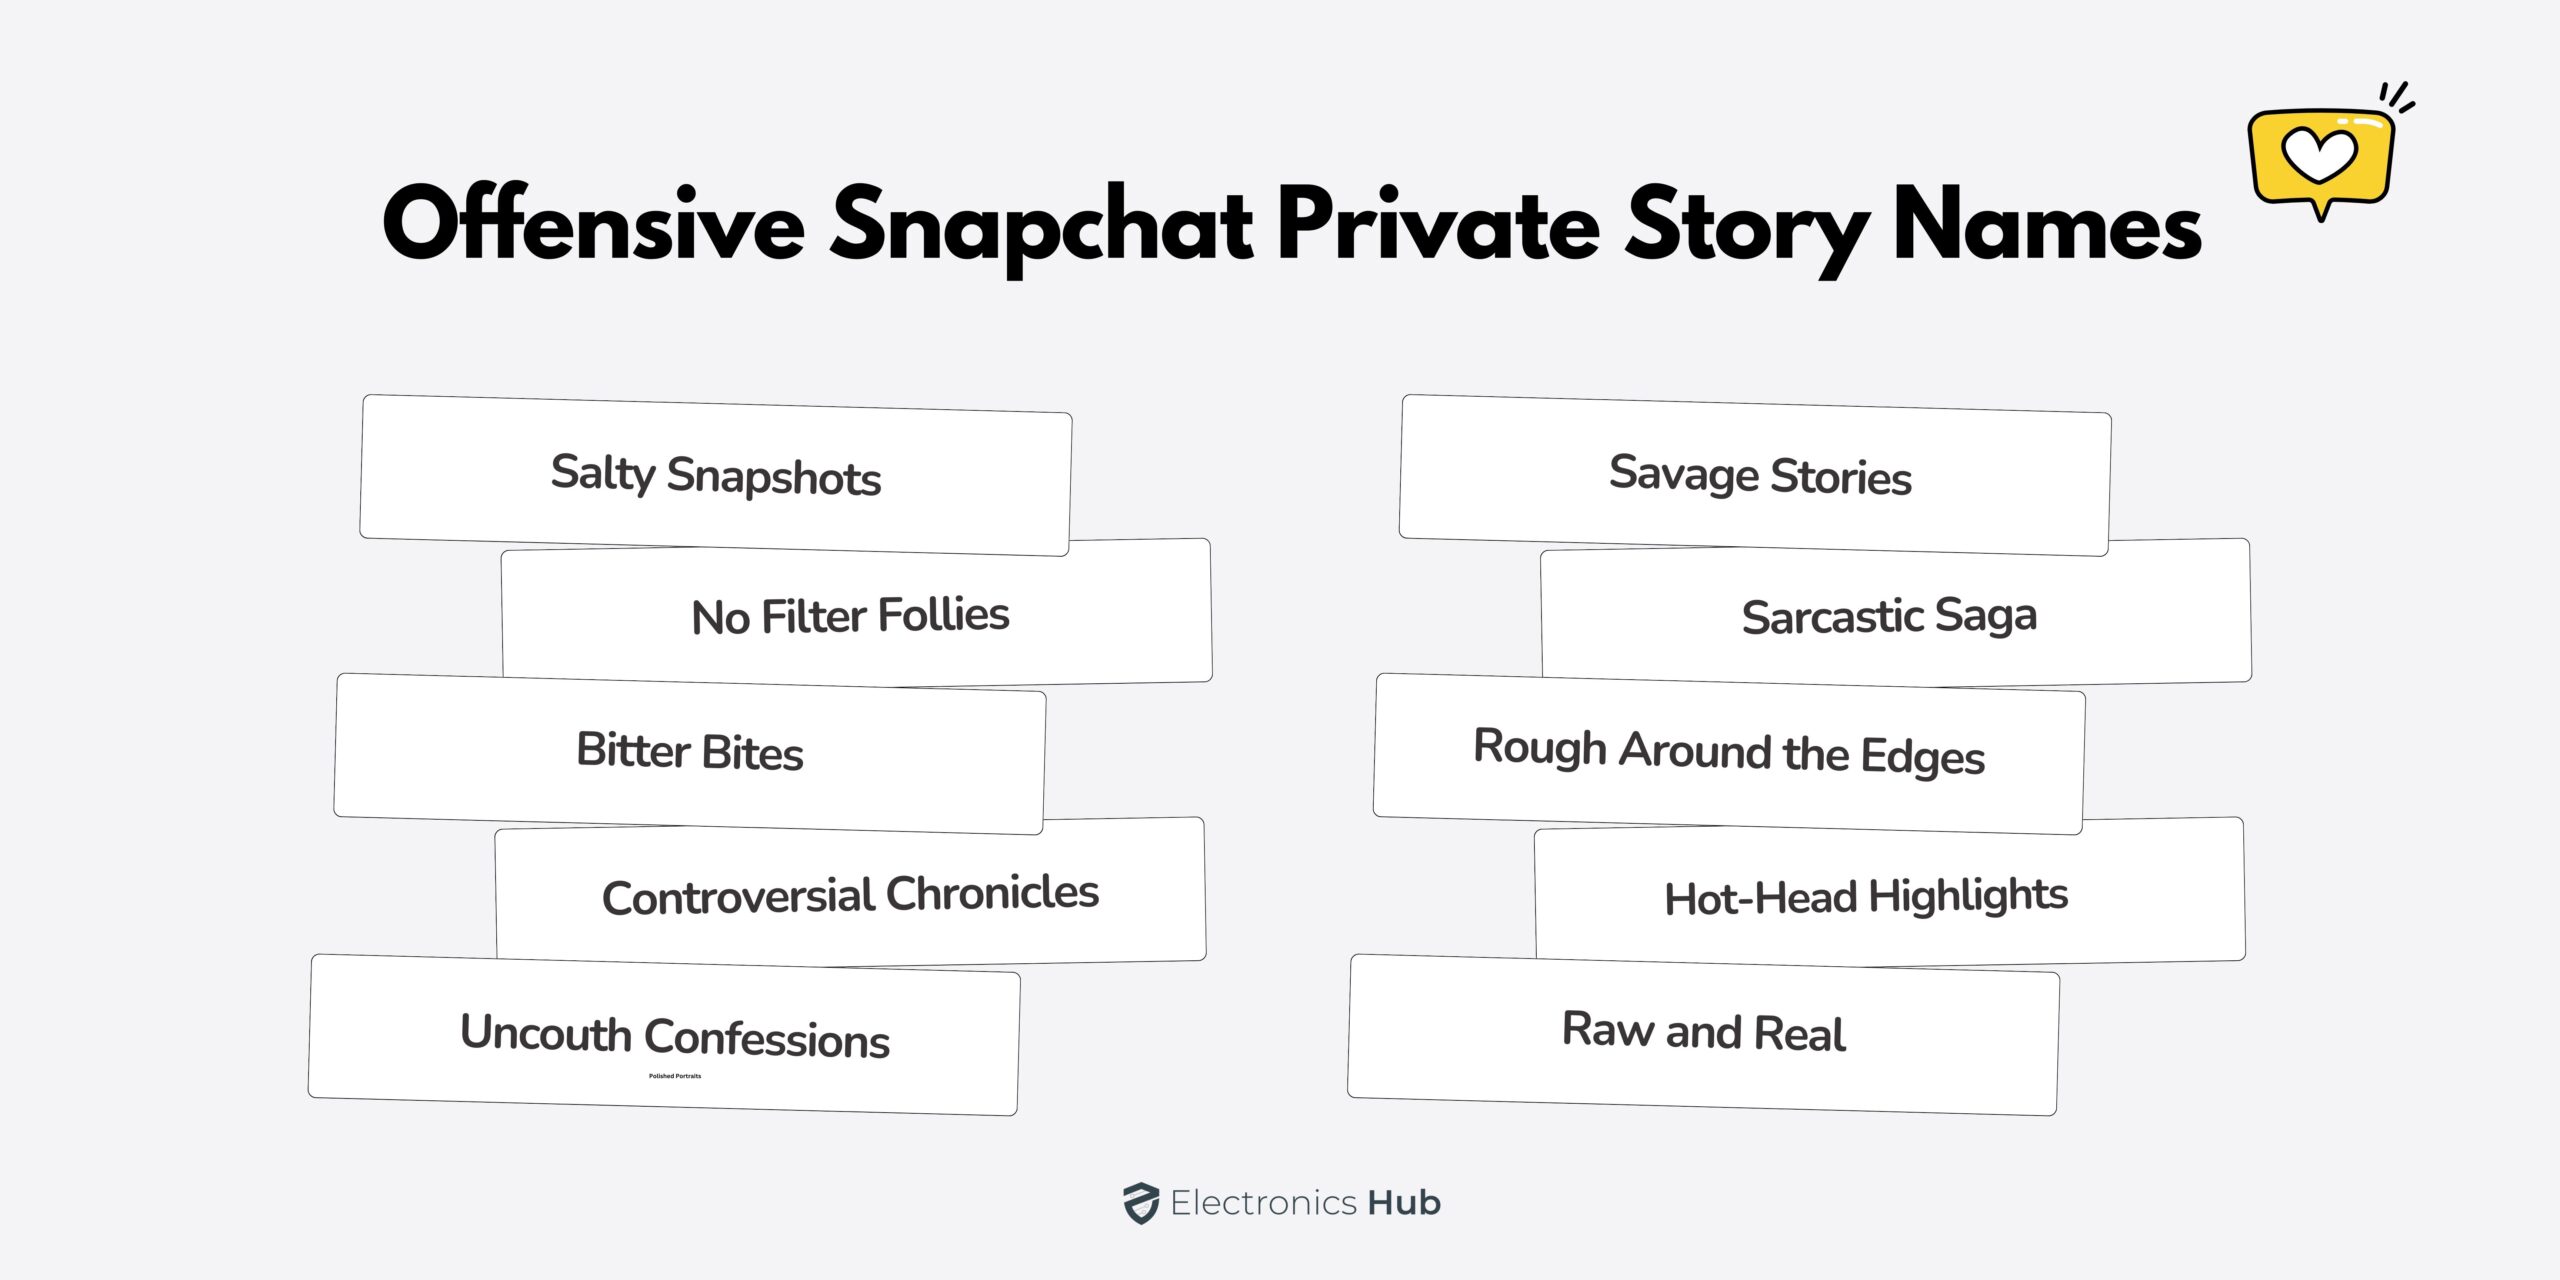 Offensive Snapchat Private Story Names